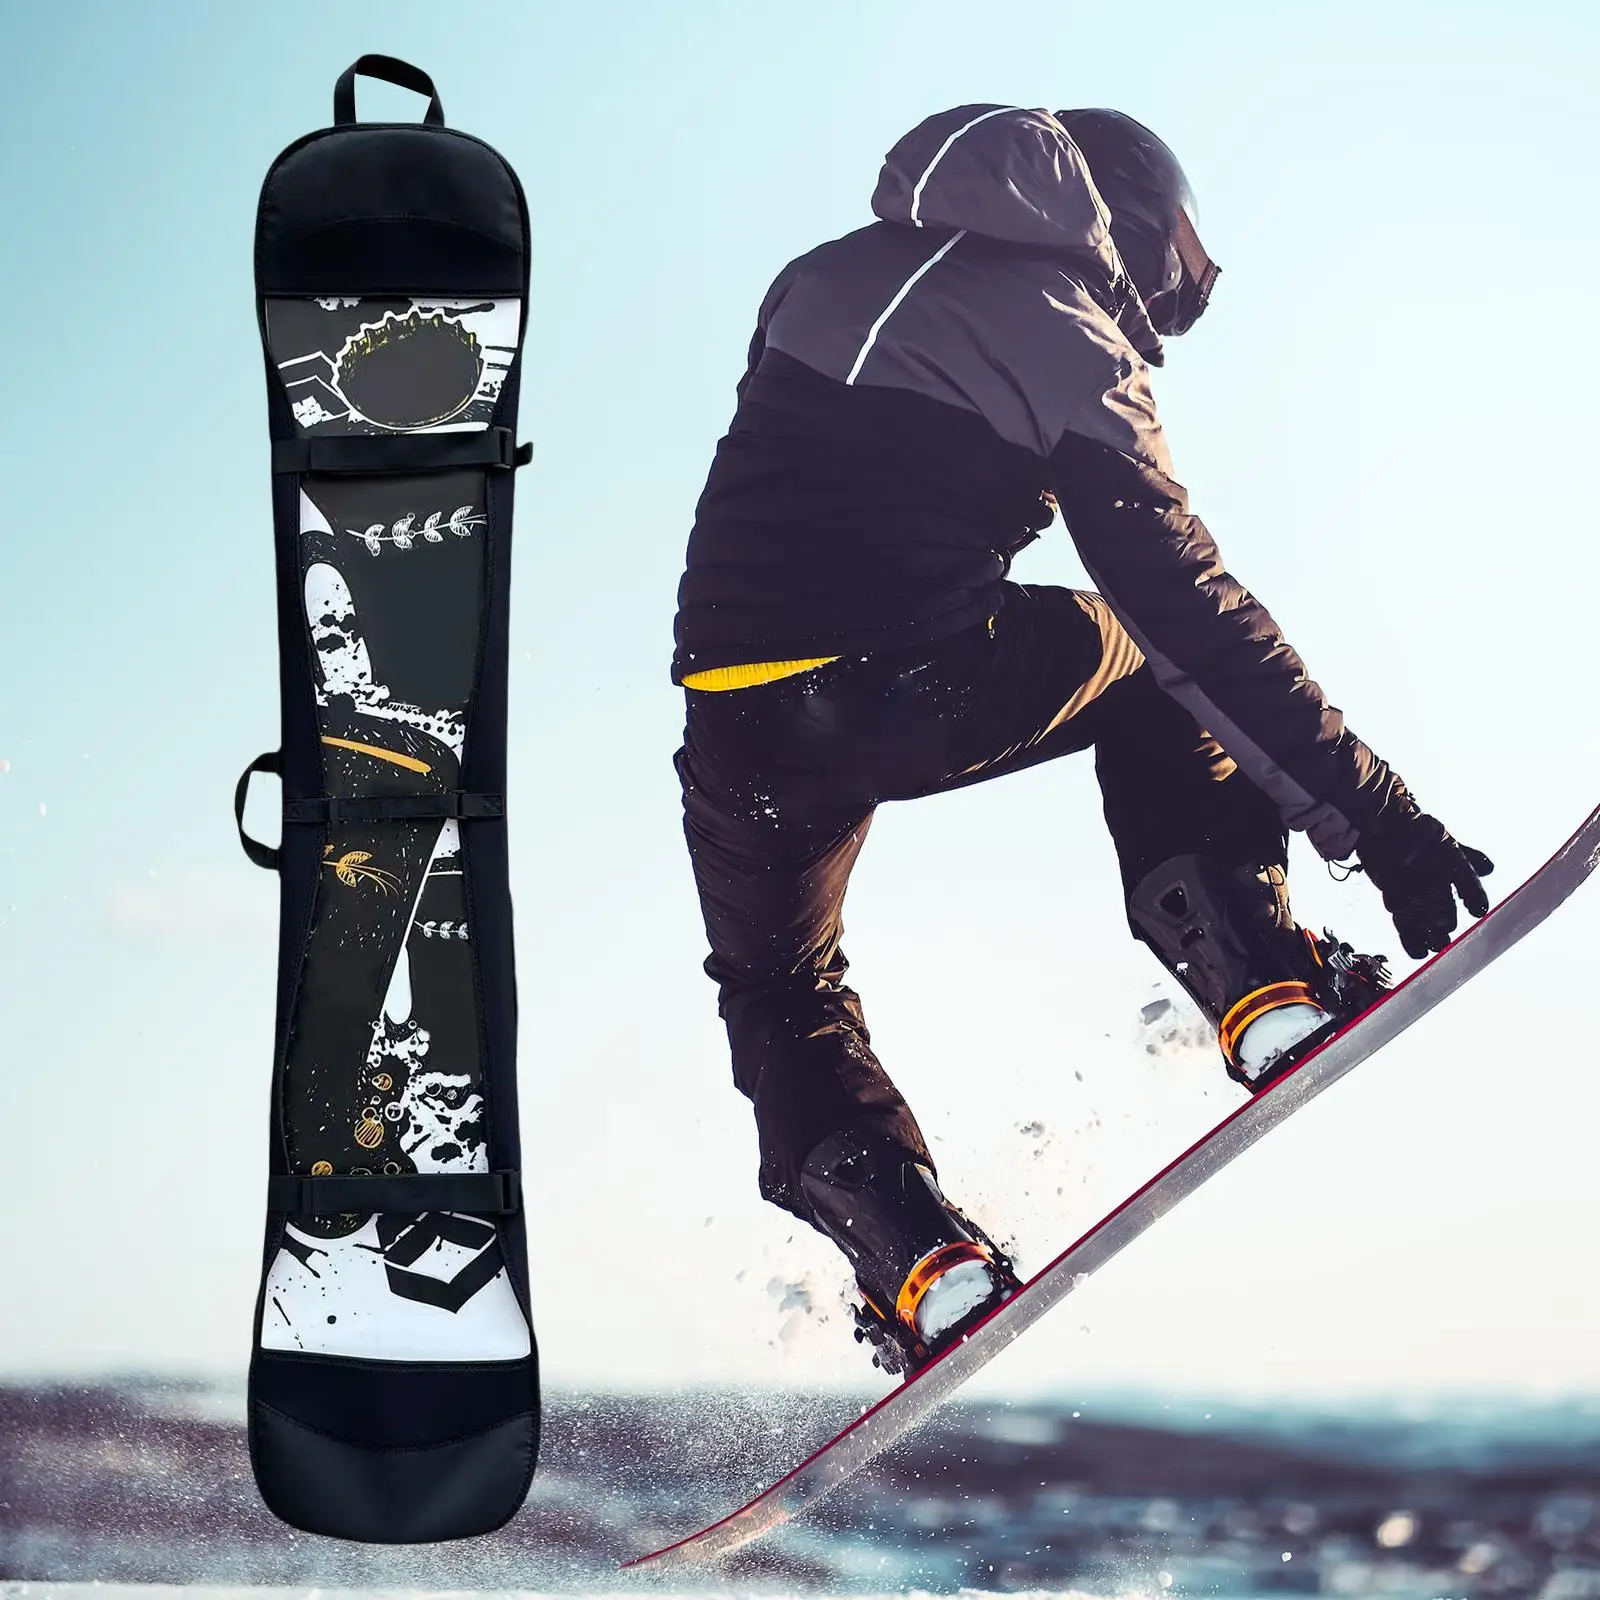 Snowboard Bag Protection Adjustable Belt with Padded Waterproof for Winter Sports